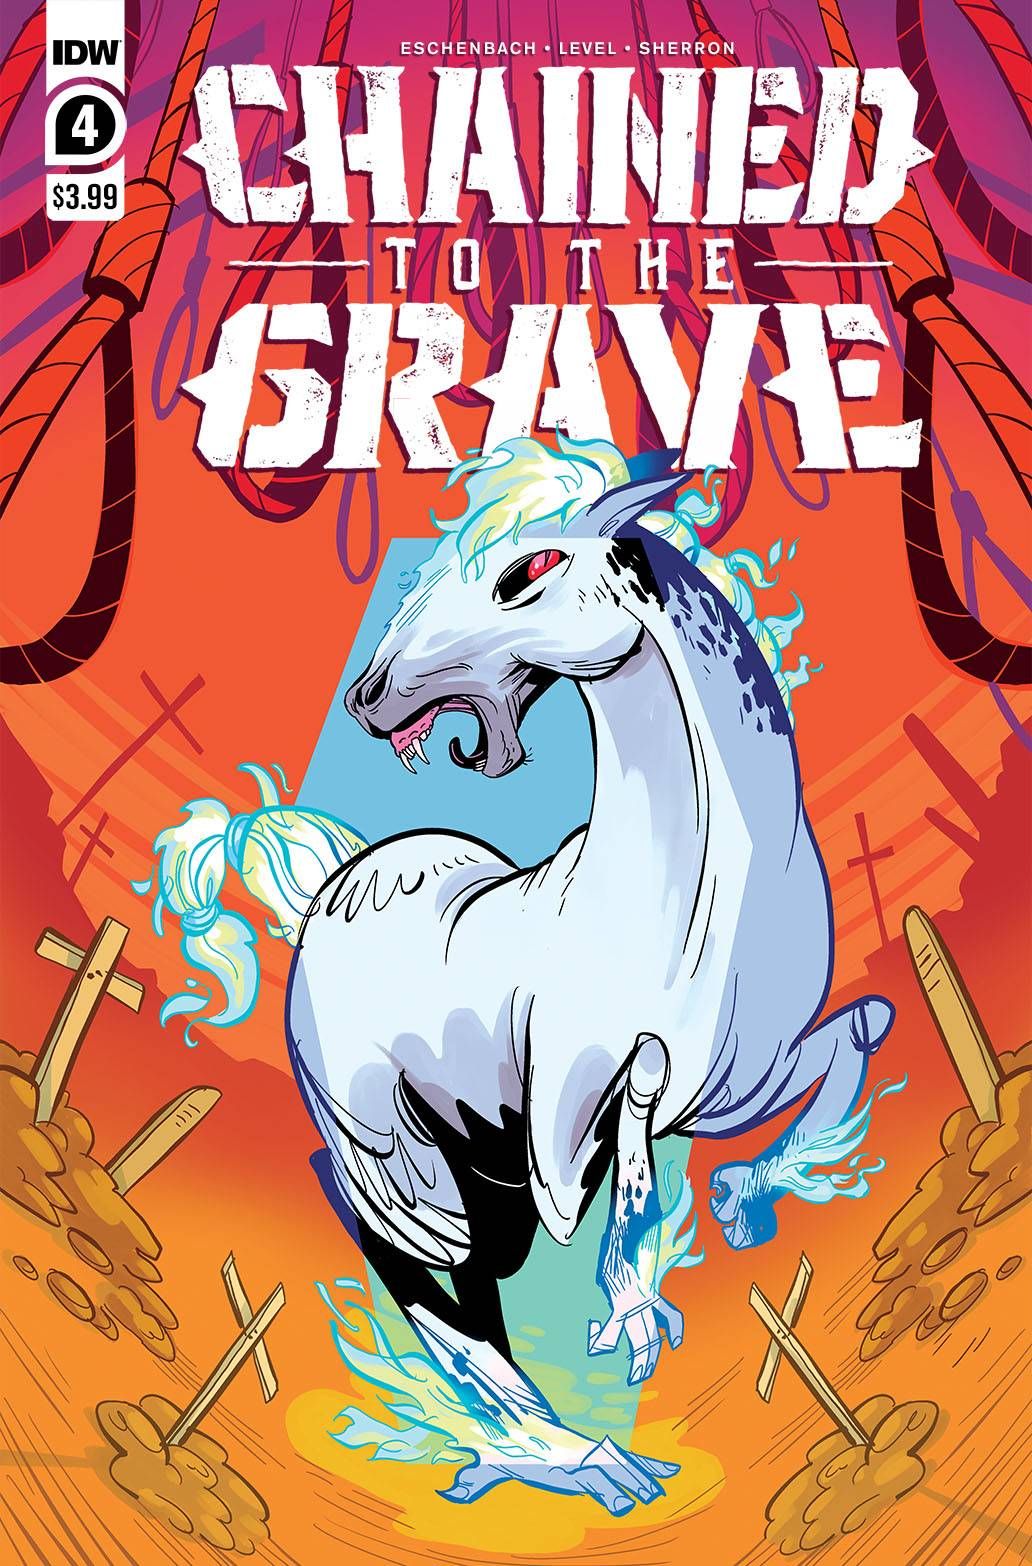 Chained To The Grave #4 Comic